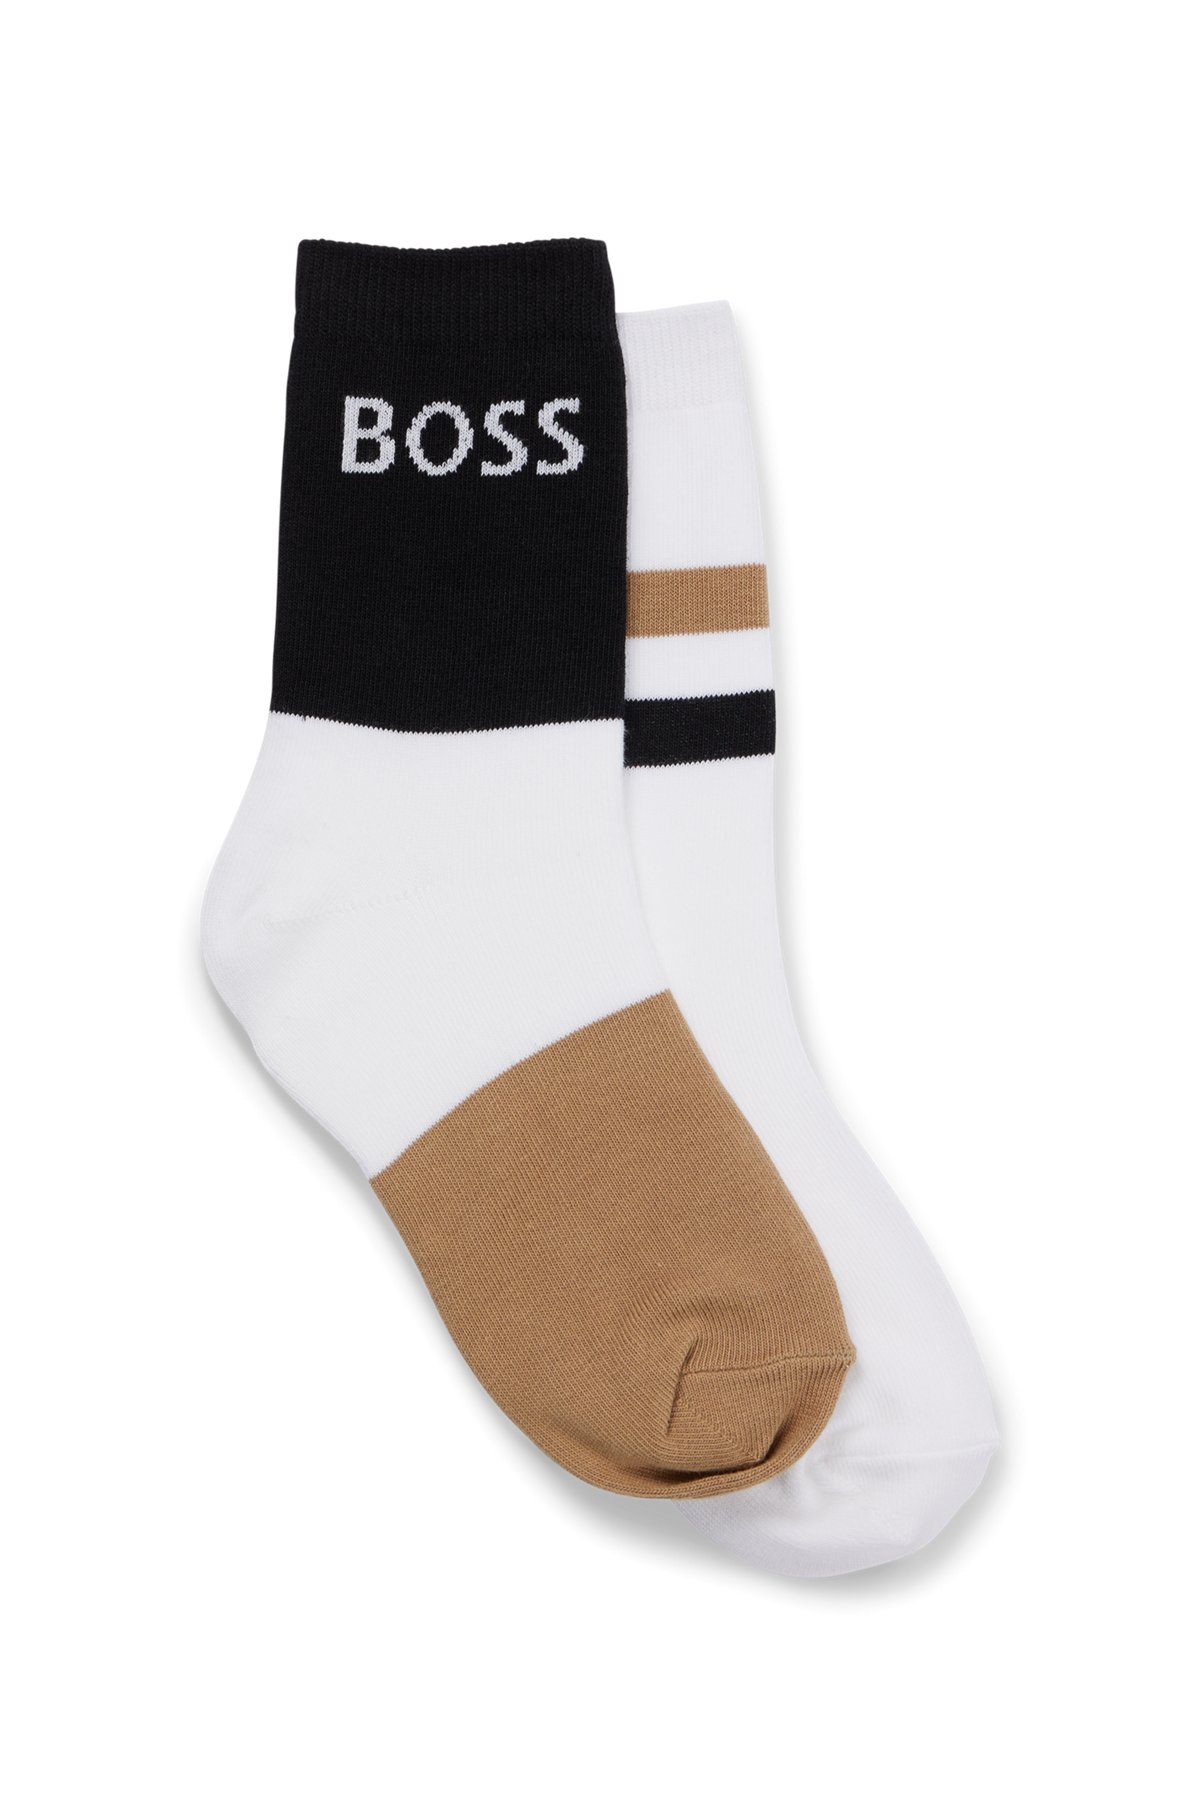 BOSS - Kids\' two-pack of socks with logo details